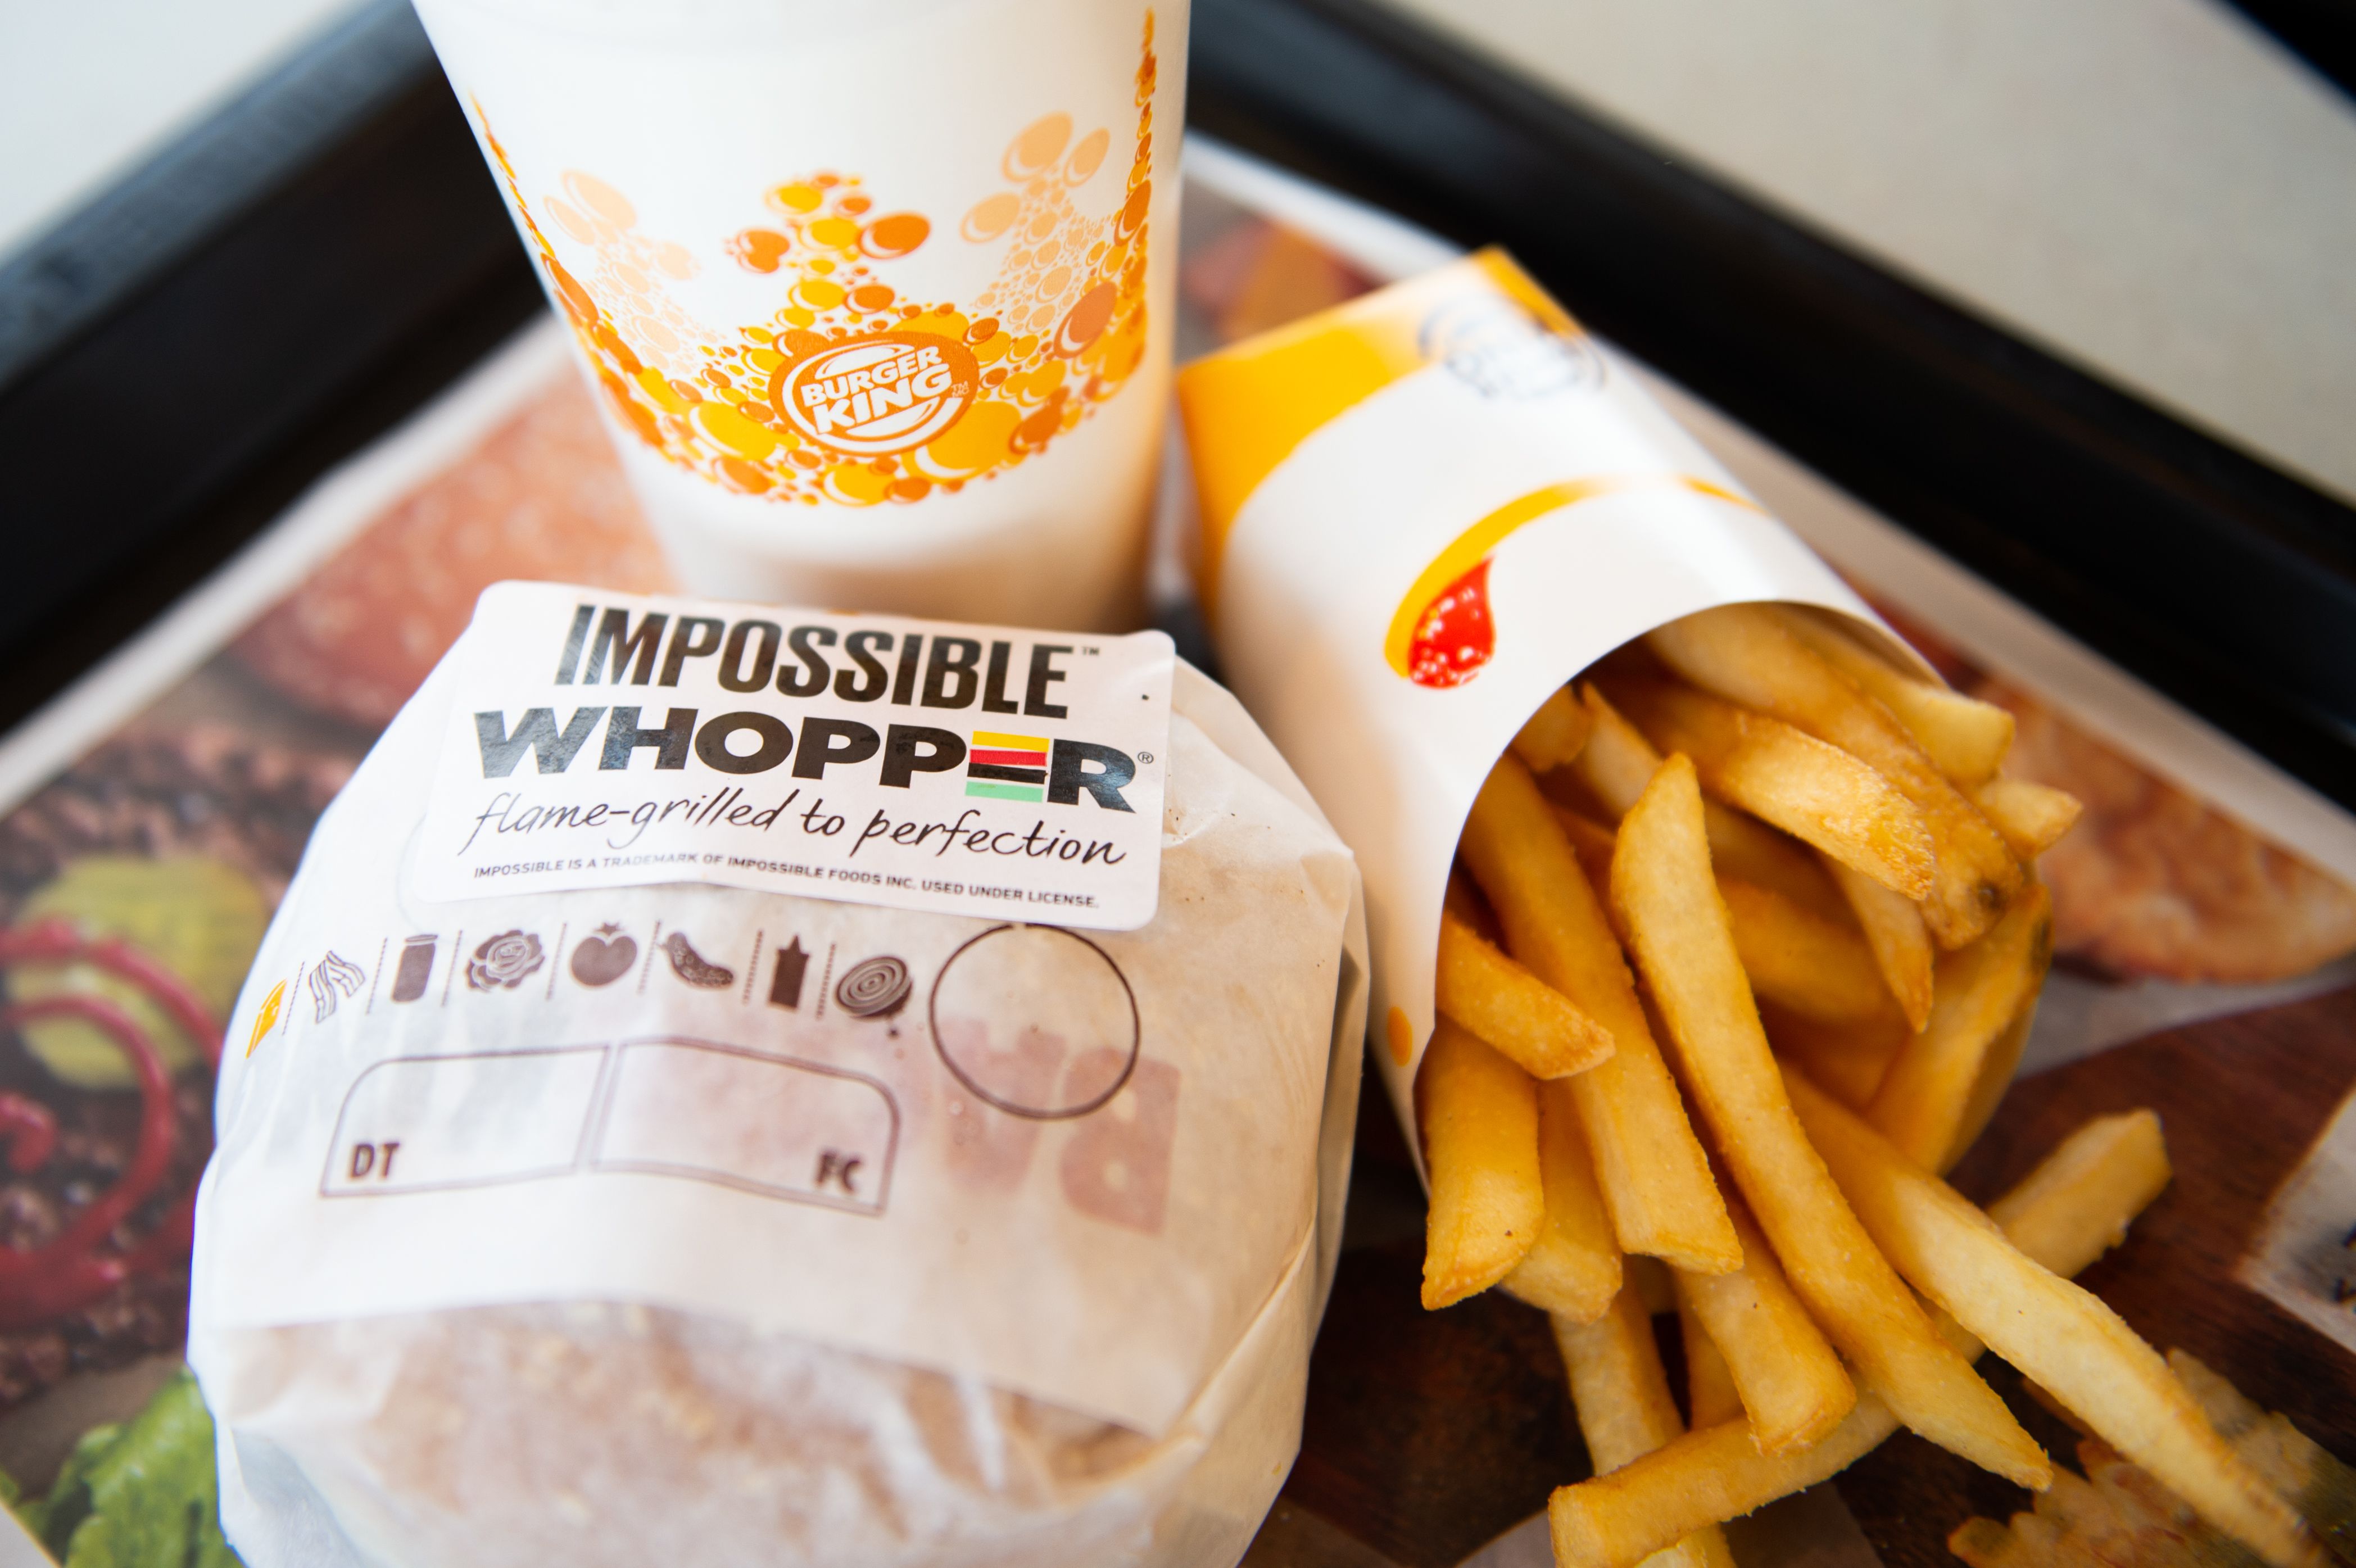 The Unattainable Whopper is driving regular site visitors to Burger King, information reveals